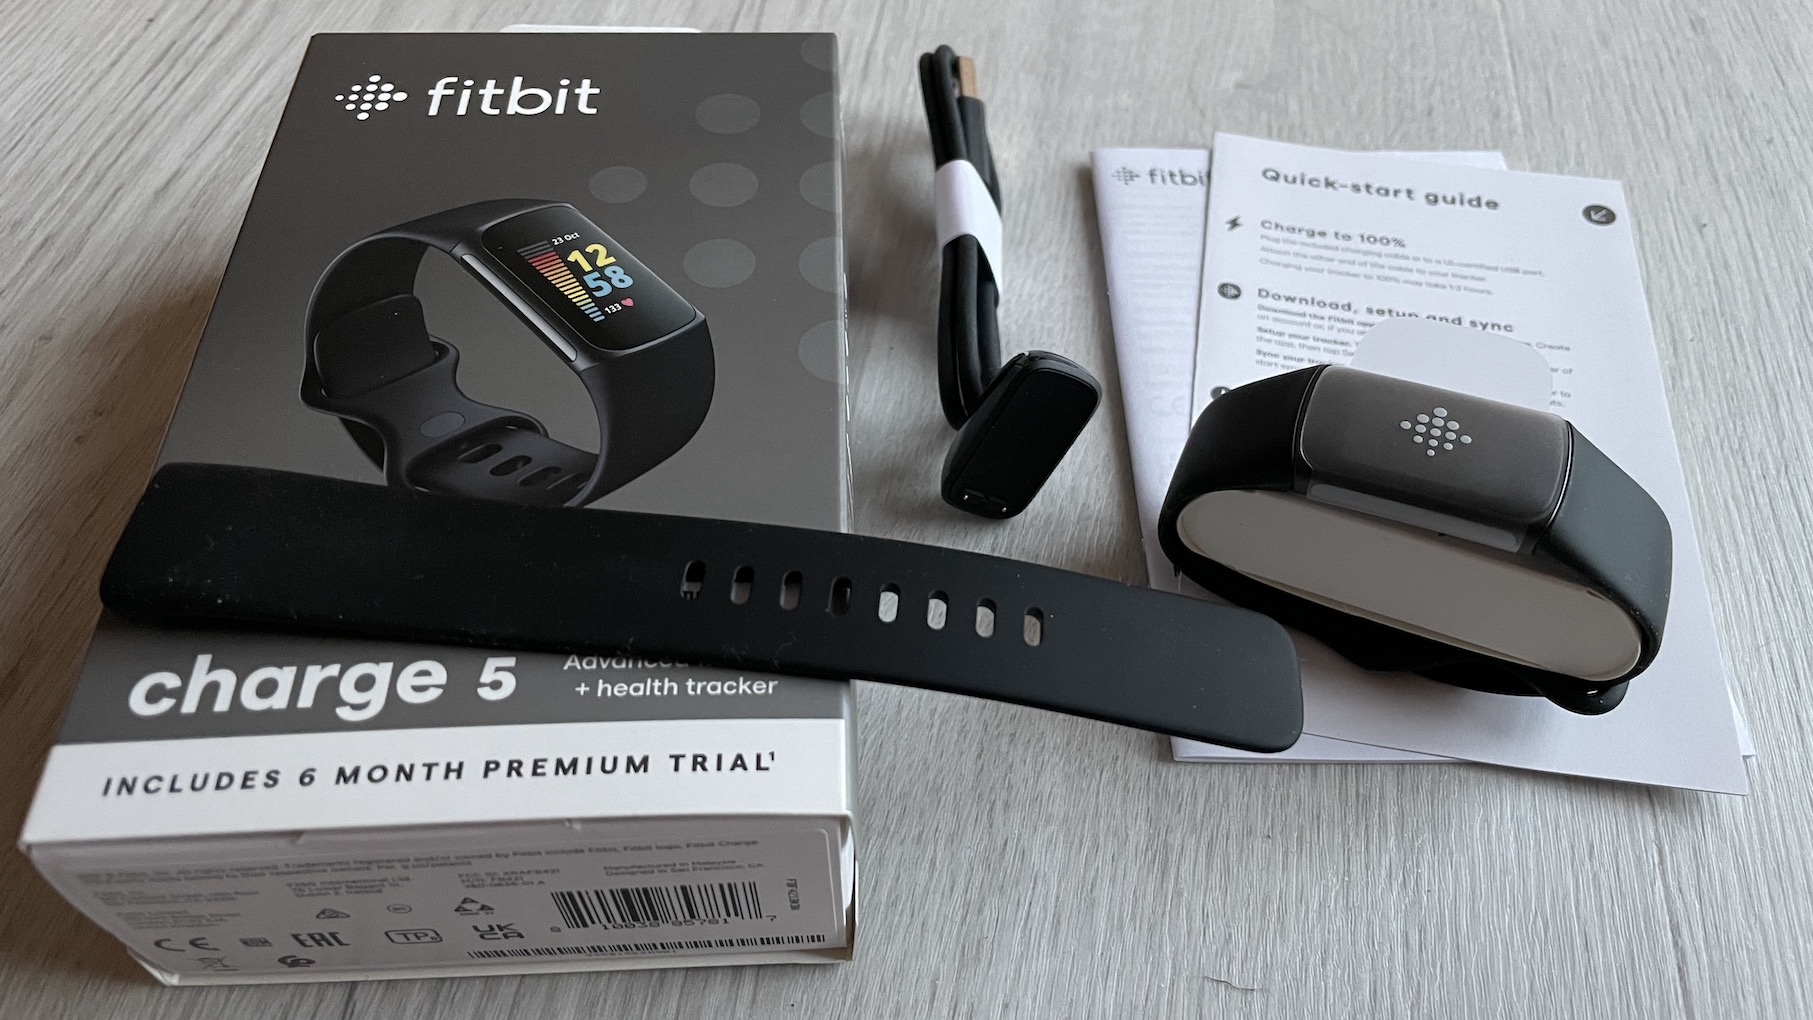 Fitbit Charge 5 Specifications, Features and Price - Geeky Wrist